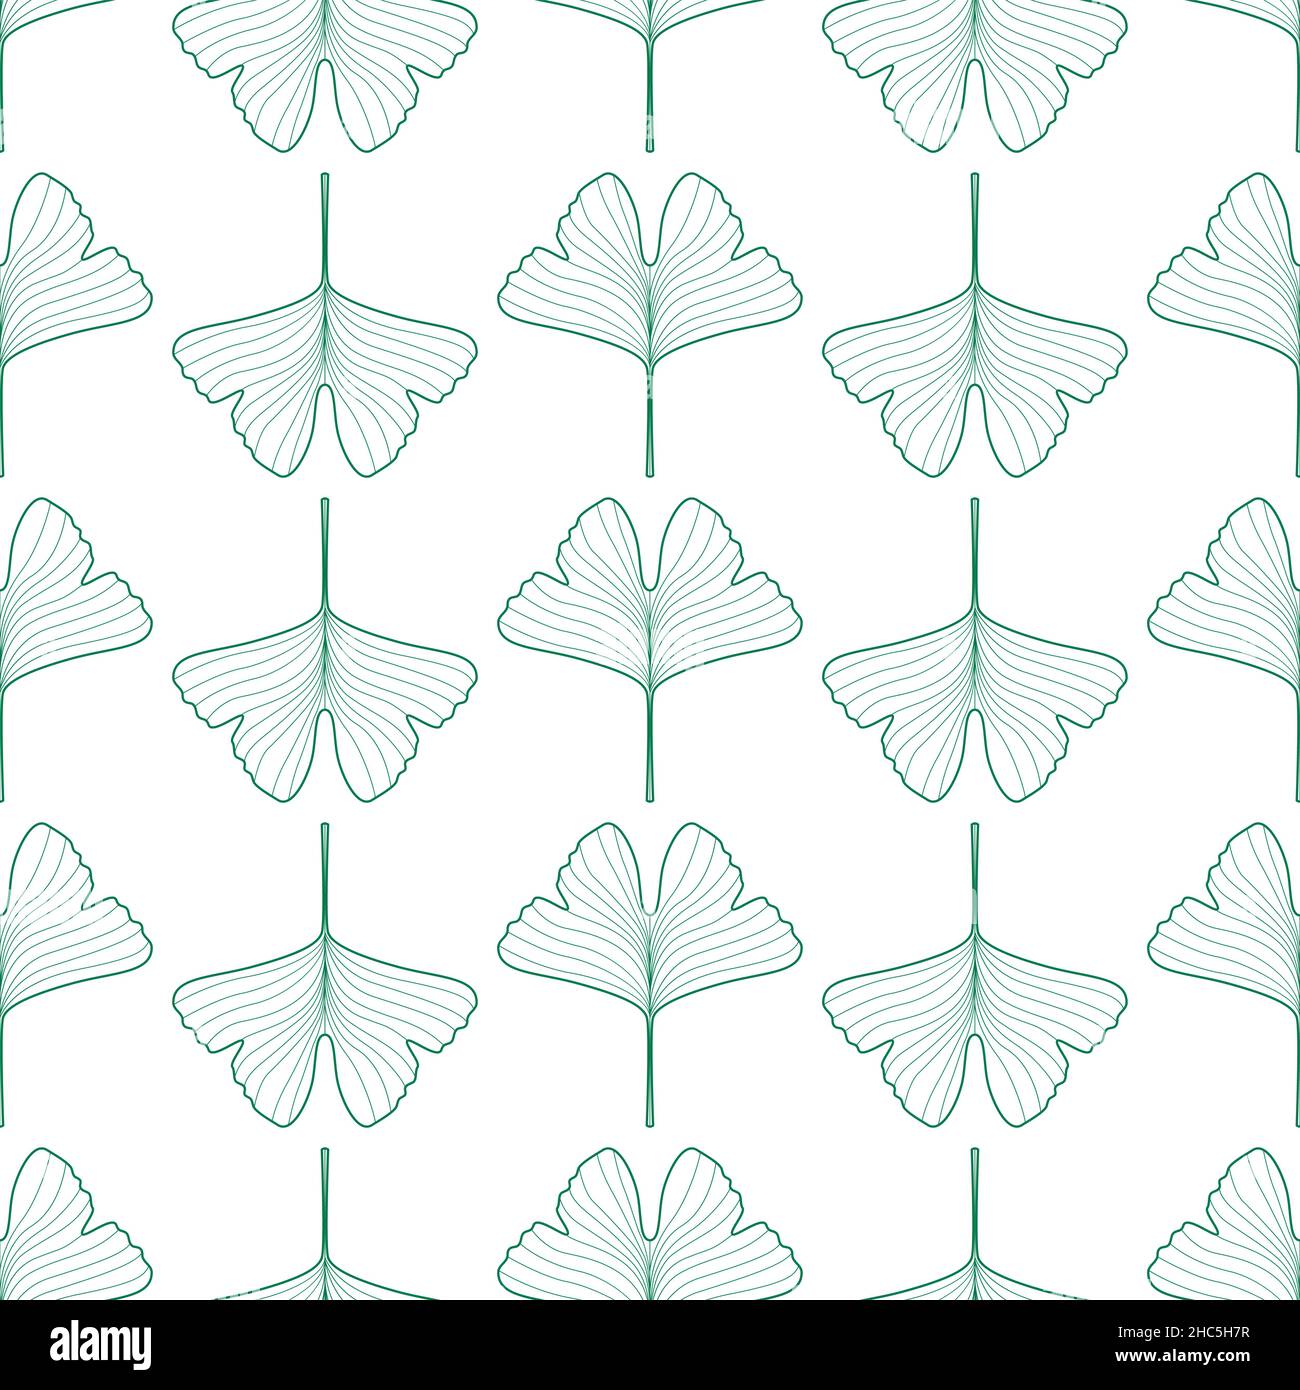 Seamless pattern of green contoured ginkgo biloba leaves Stock Vector